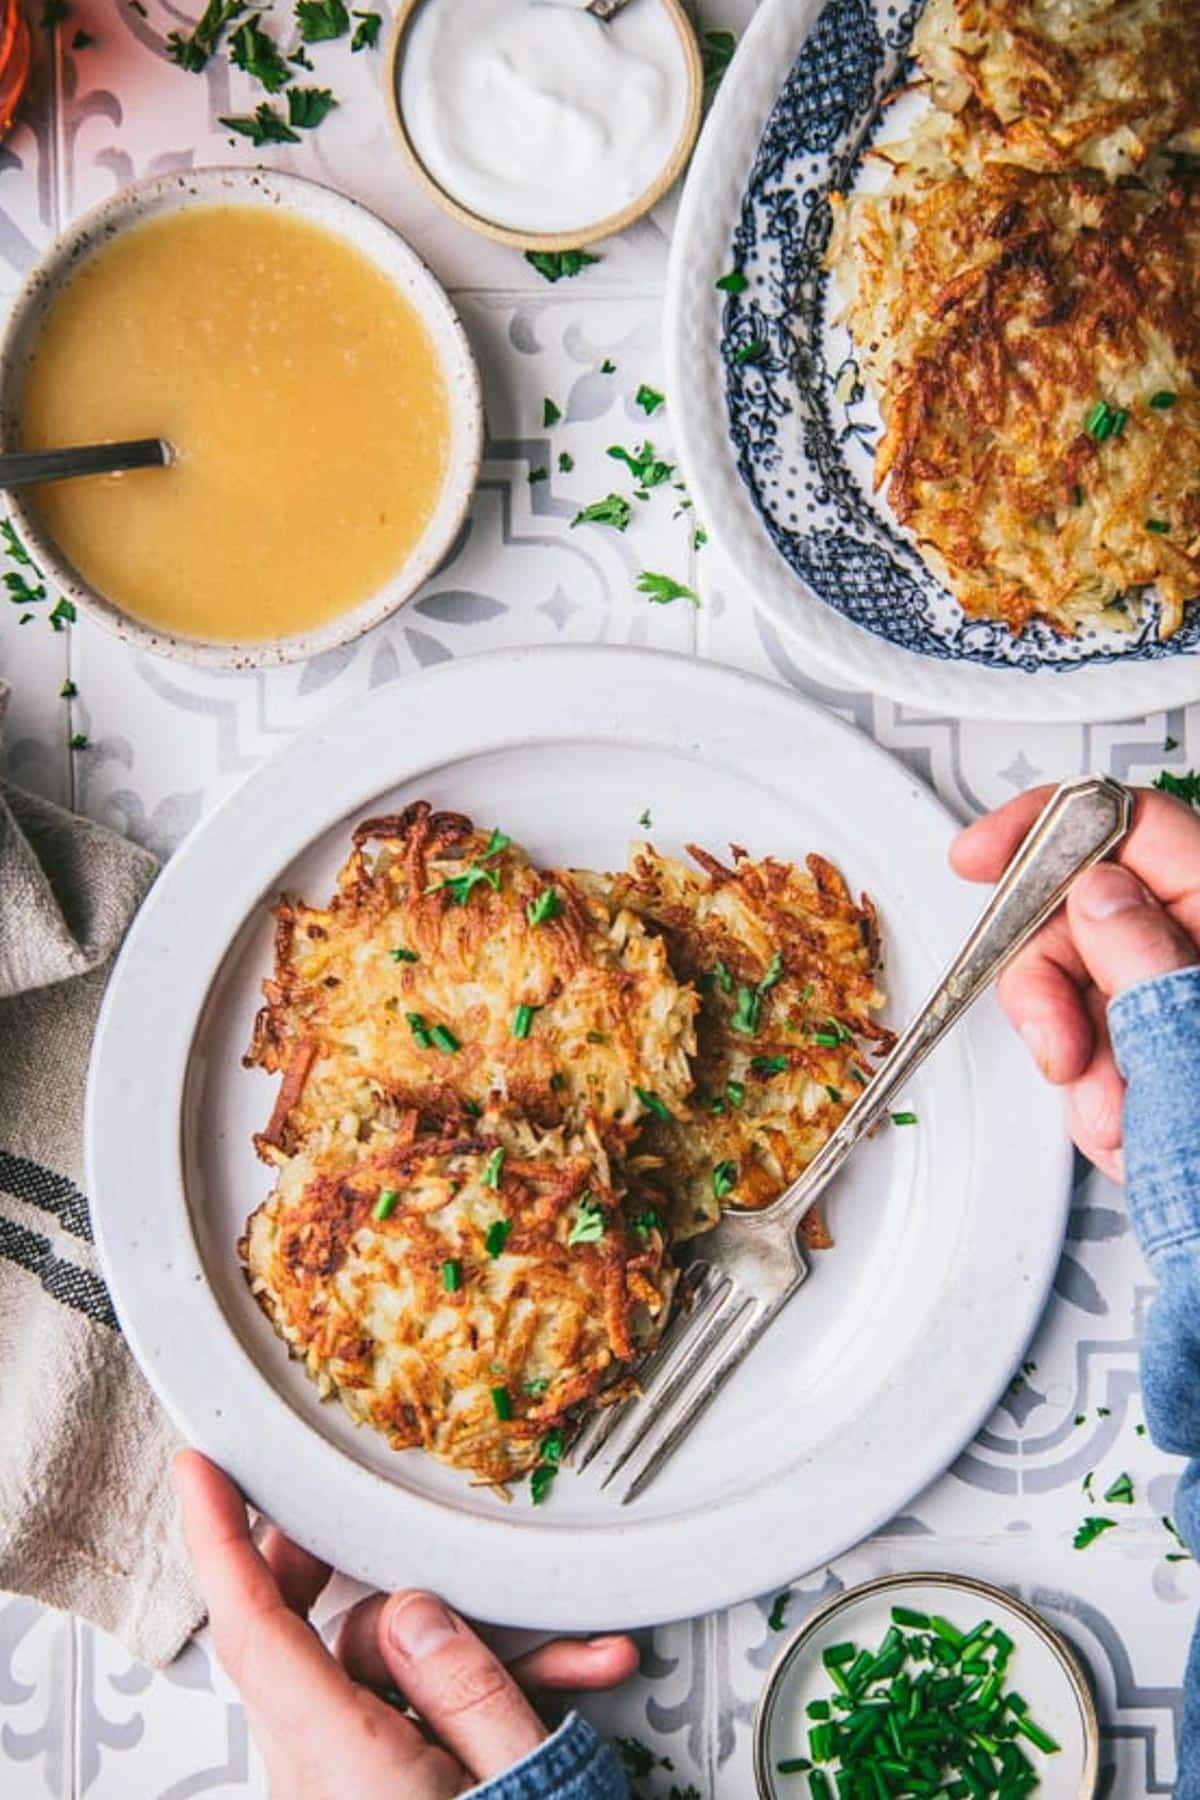 Overhead image of hands eating potato pancakes with a side of applesauce.